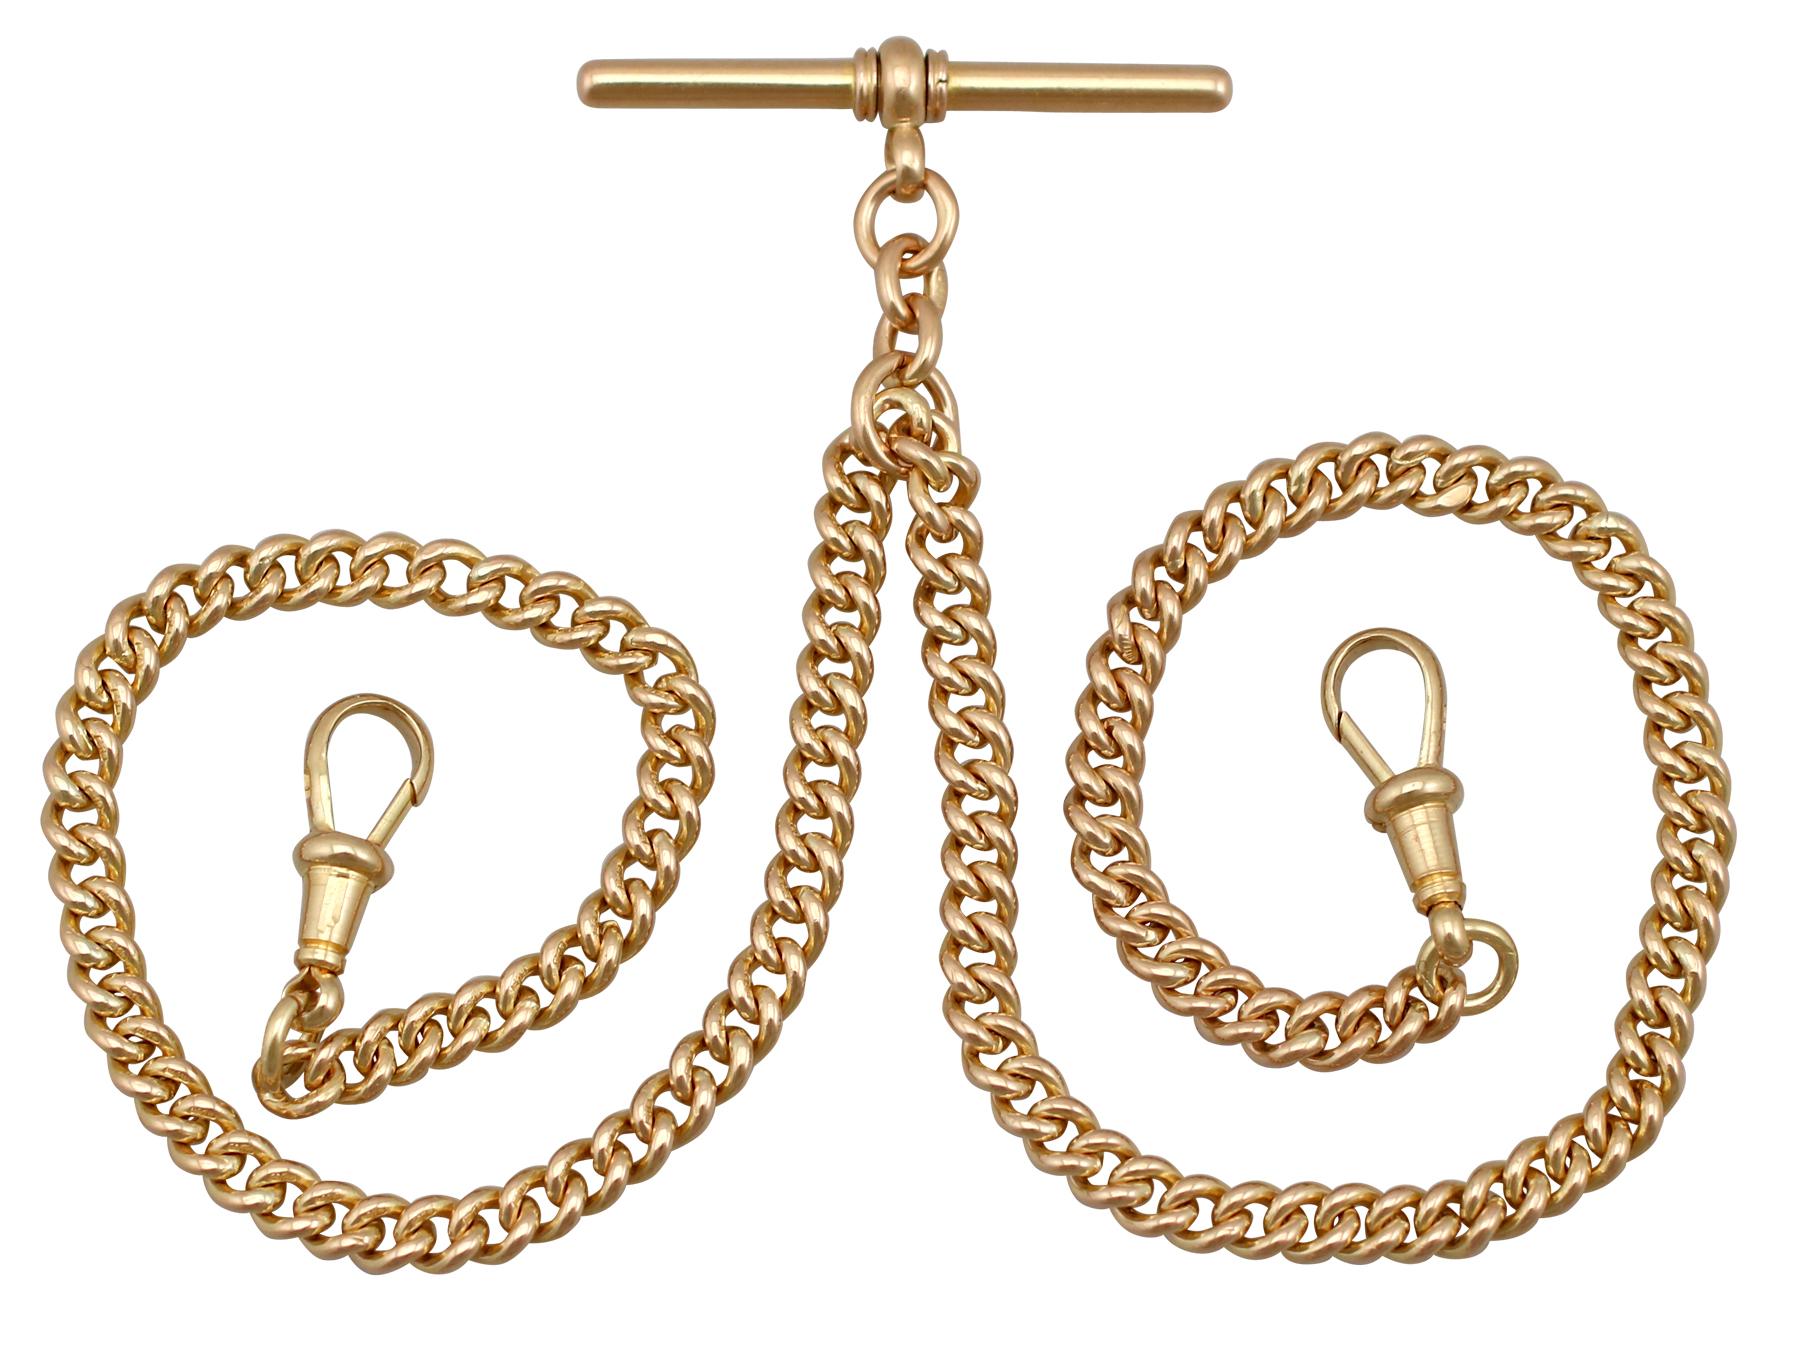 An exceptional antique 18 karat yellow gold double Albert watch chain with T-bar; part of our diverse antique jewellery and estate jewelry collections.

This exceptional, fine and impressive antique gold watch chain has been crafted in 18k yellow